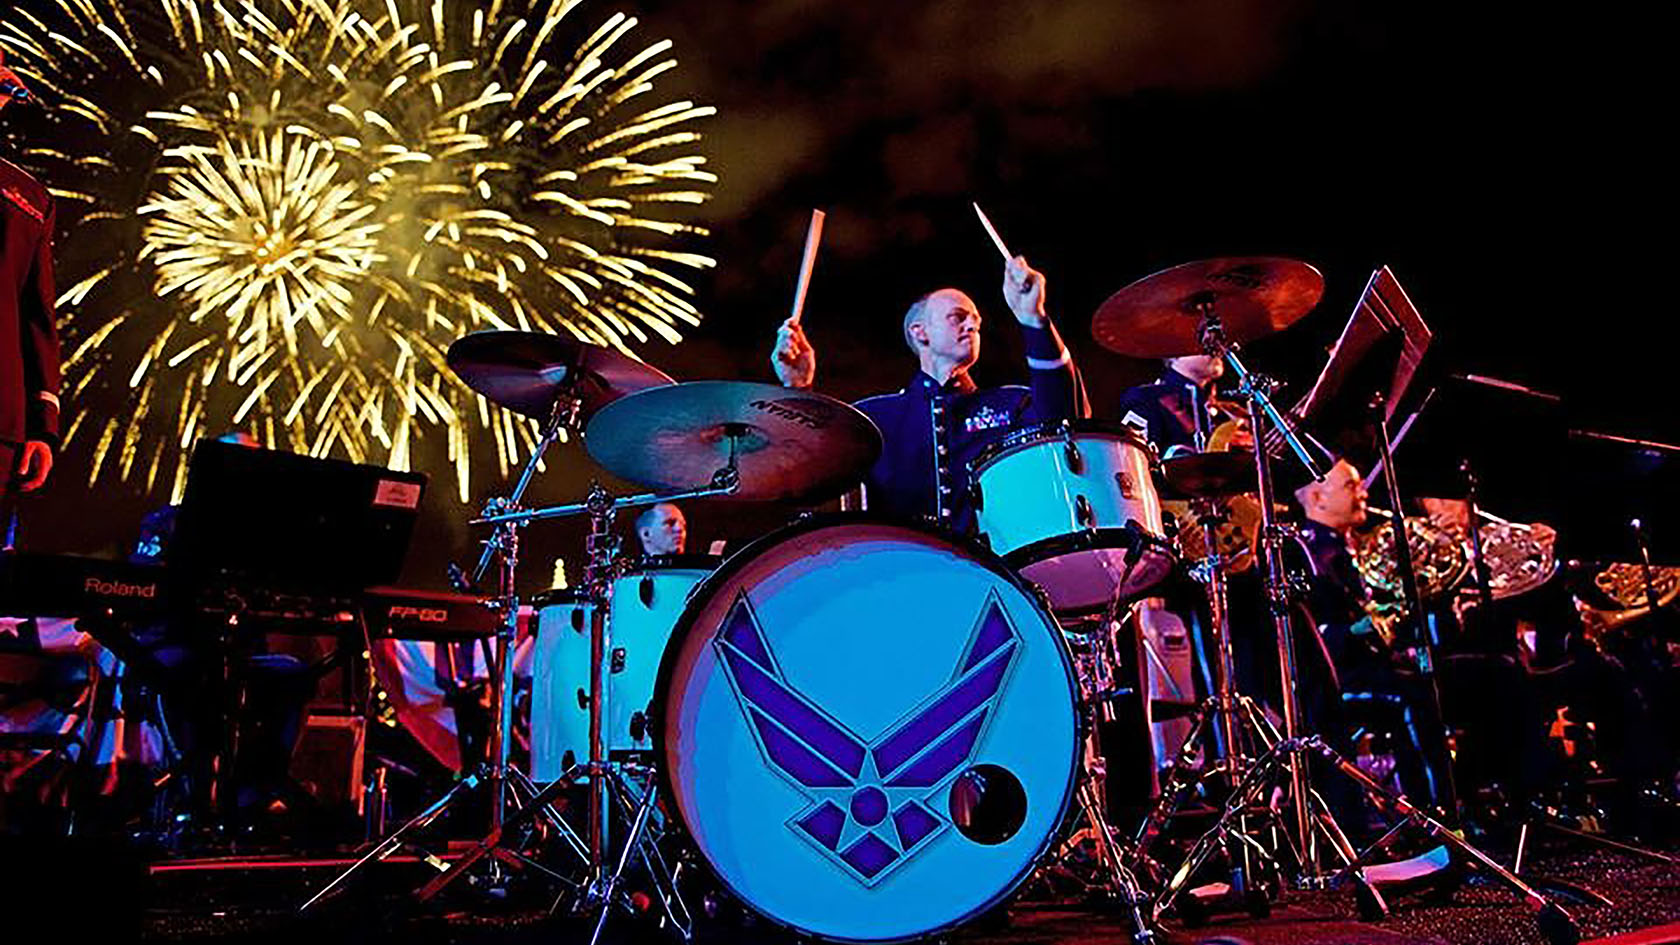 drummer playing with fireworks in background